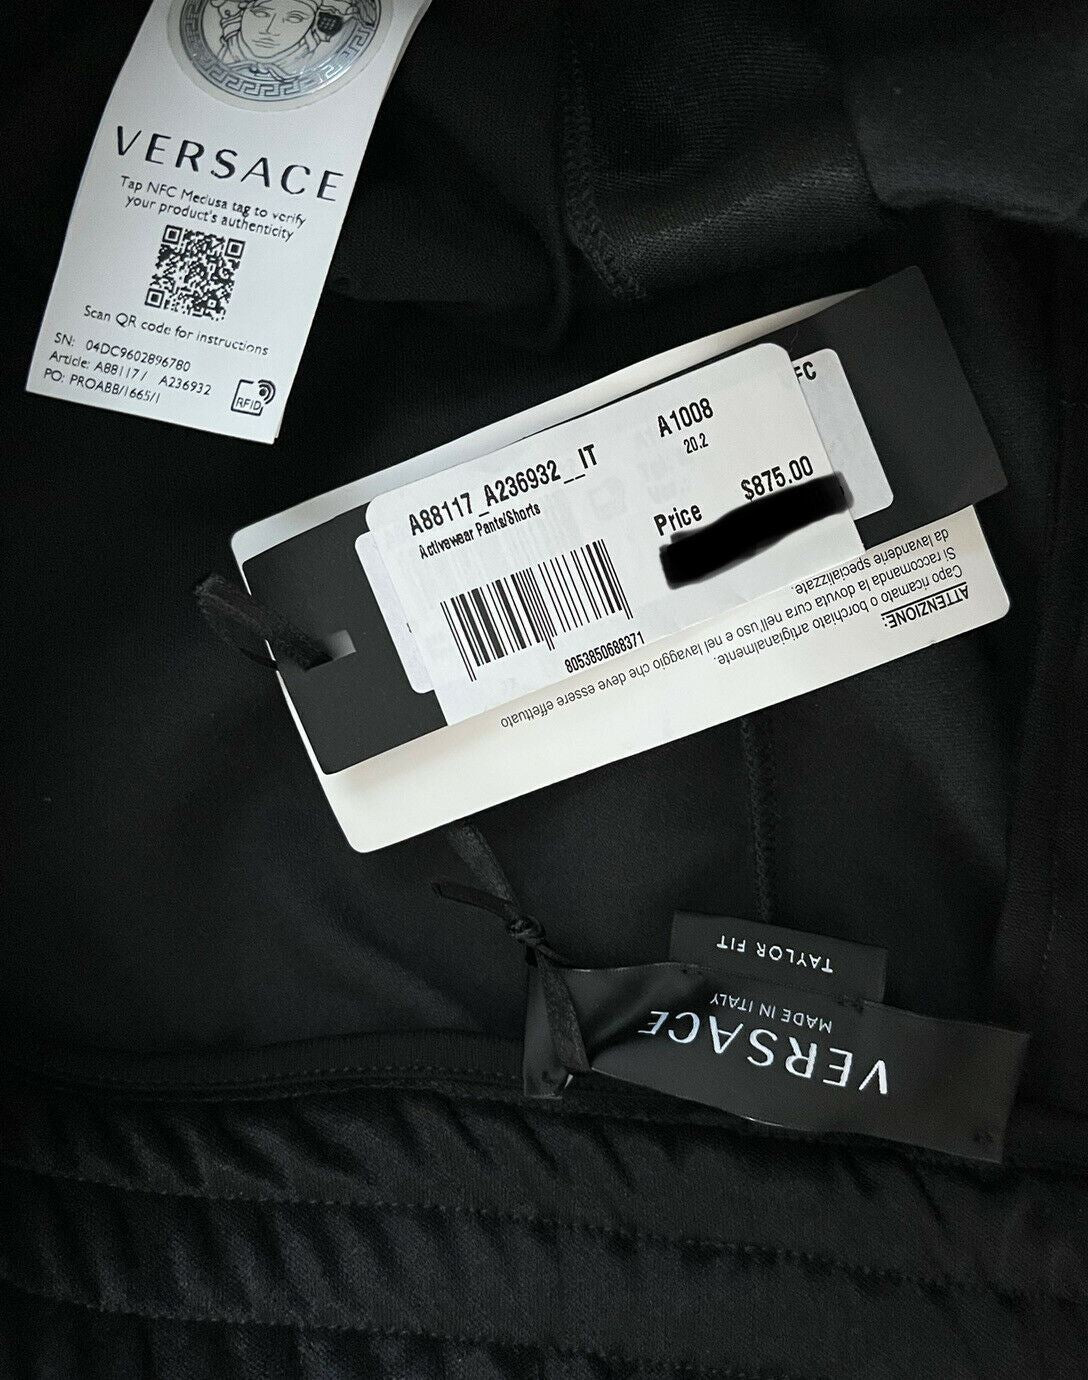 NWT $875 Versace Men's Black Tailor Fit Activewear Pants S Made in Italy A88117